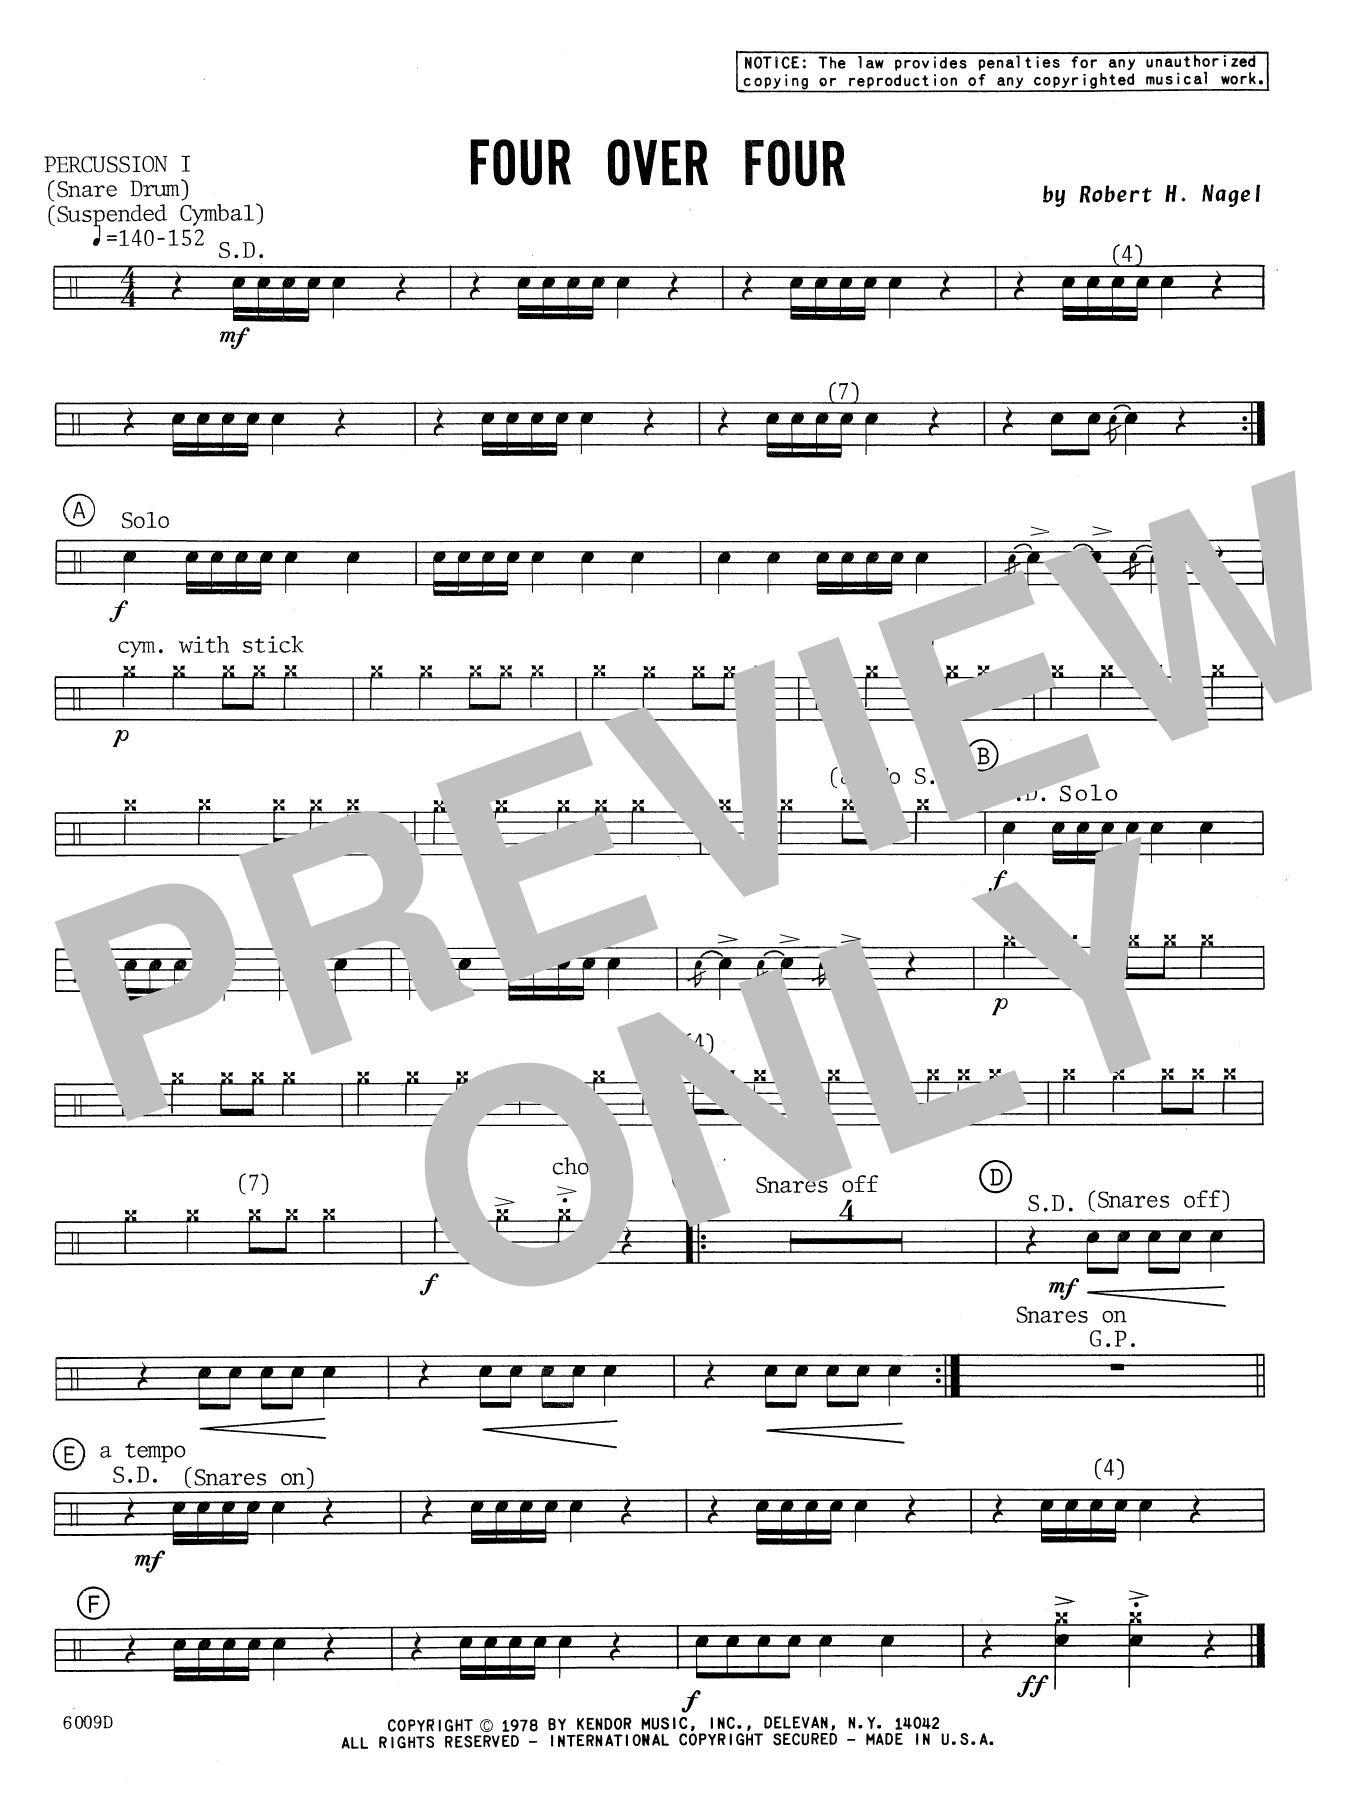 Download Robert H. Nagel Four Over Four - Percussion 1 Sheet Music